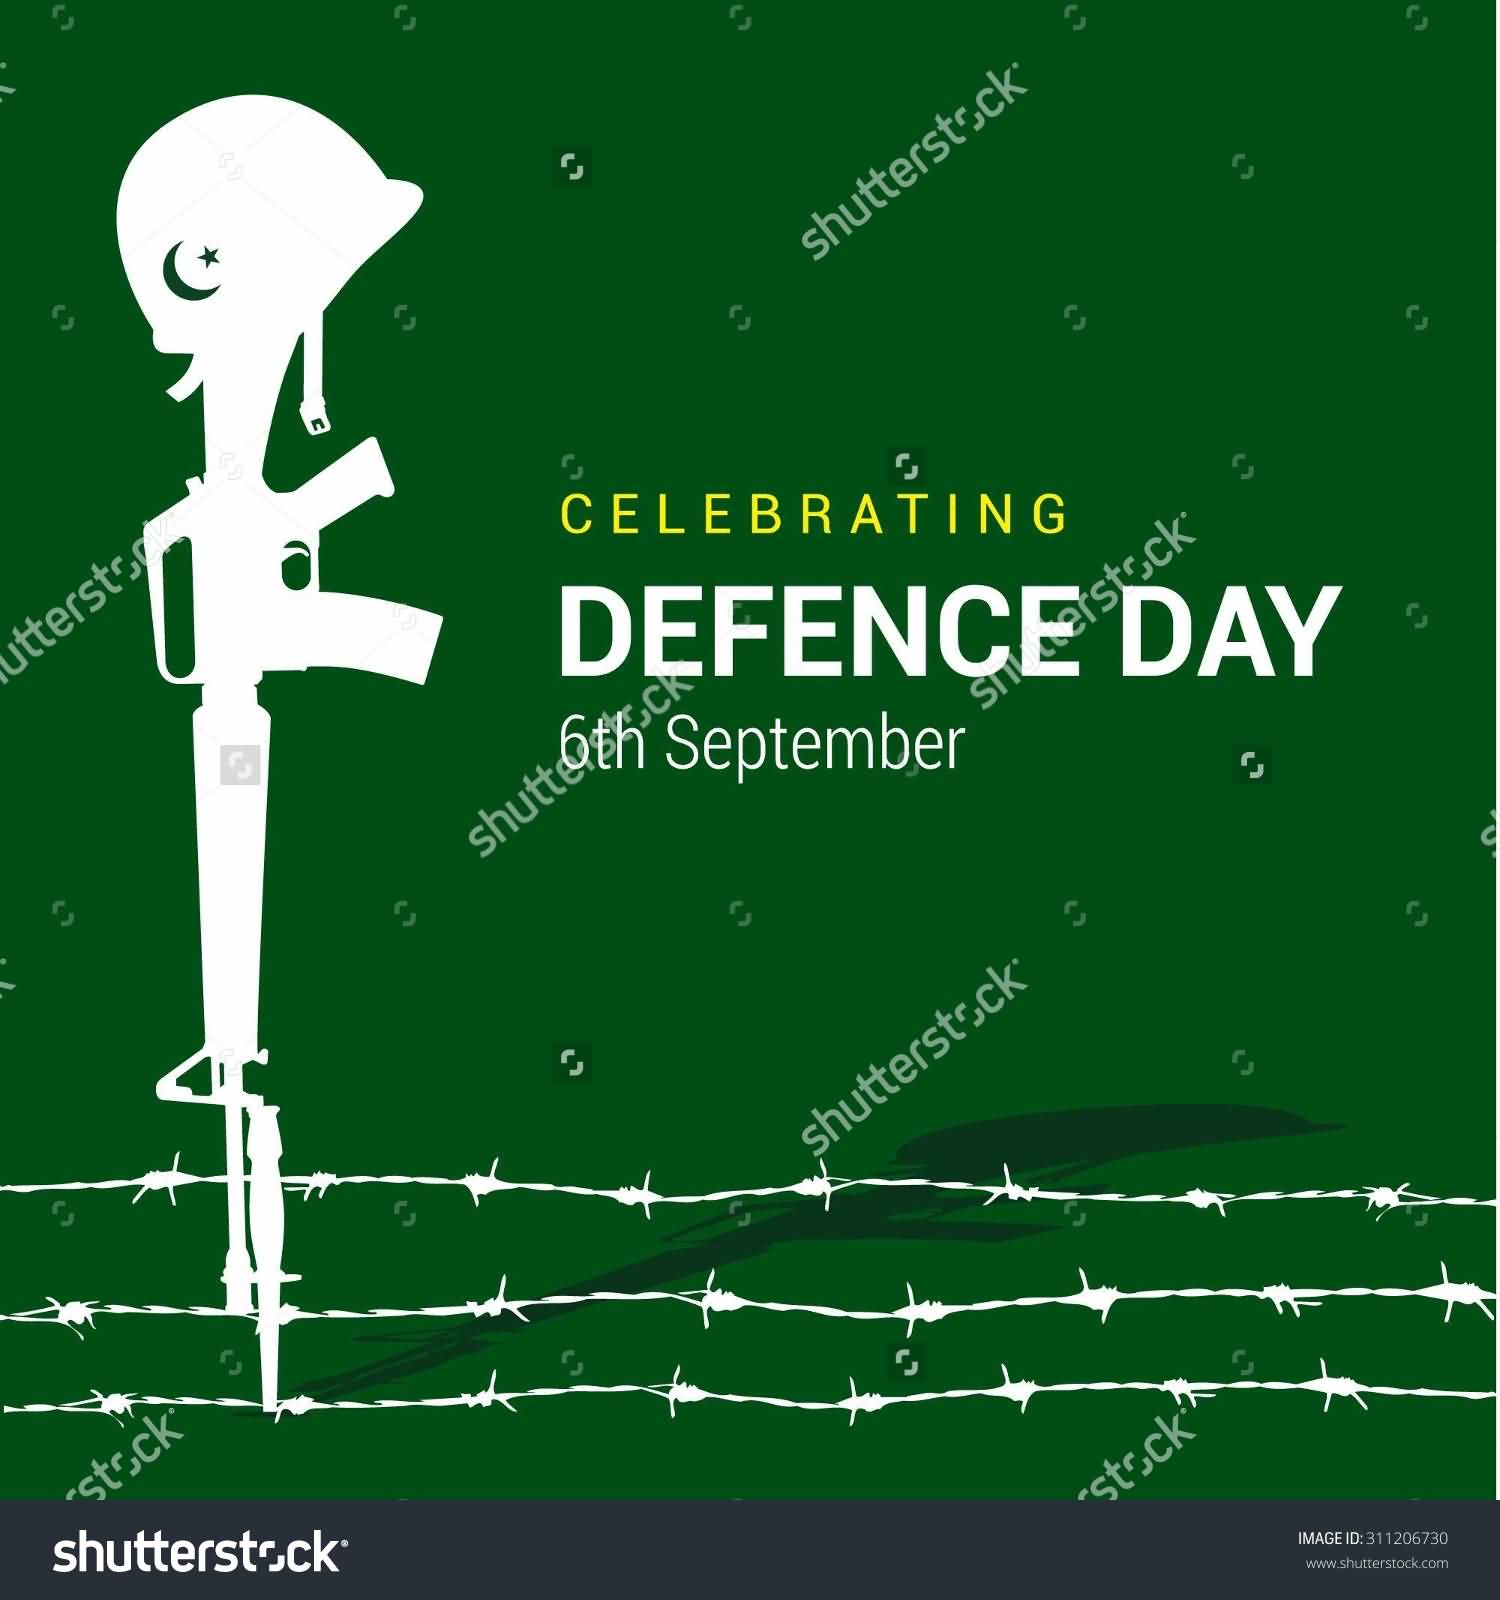 Celebrating Defence Day 6th September Gun And Helmet Picture